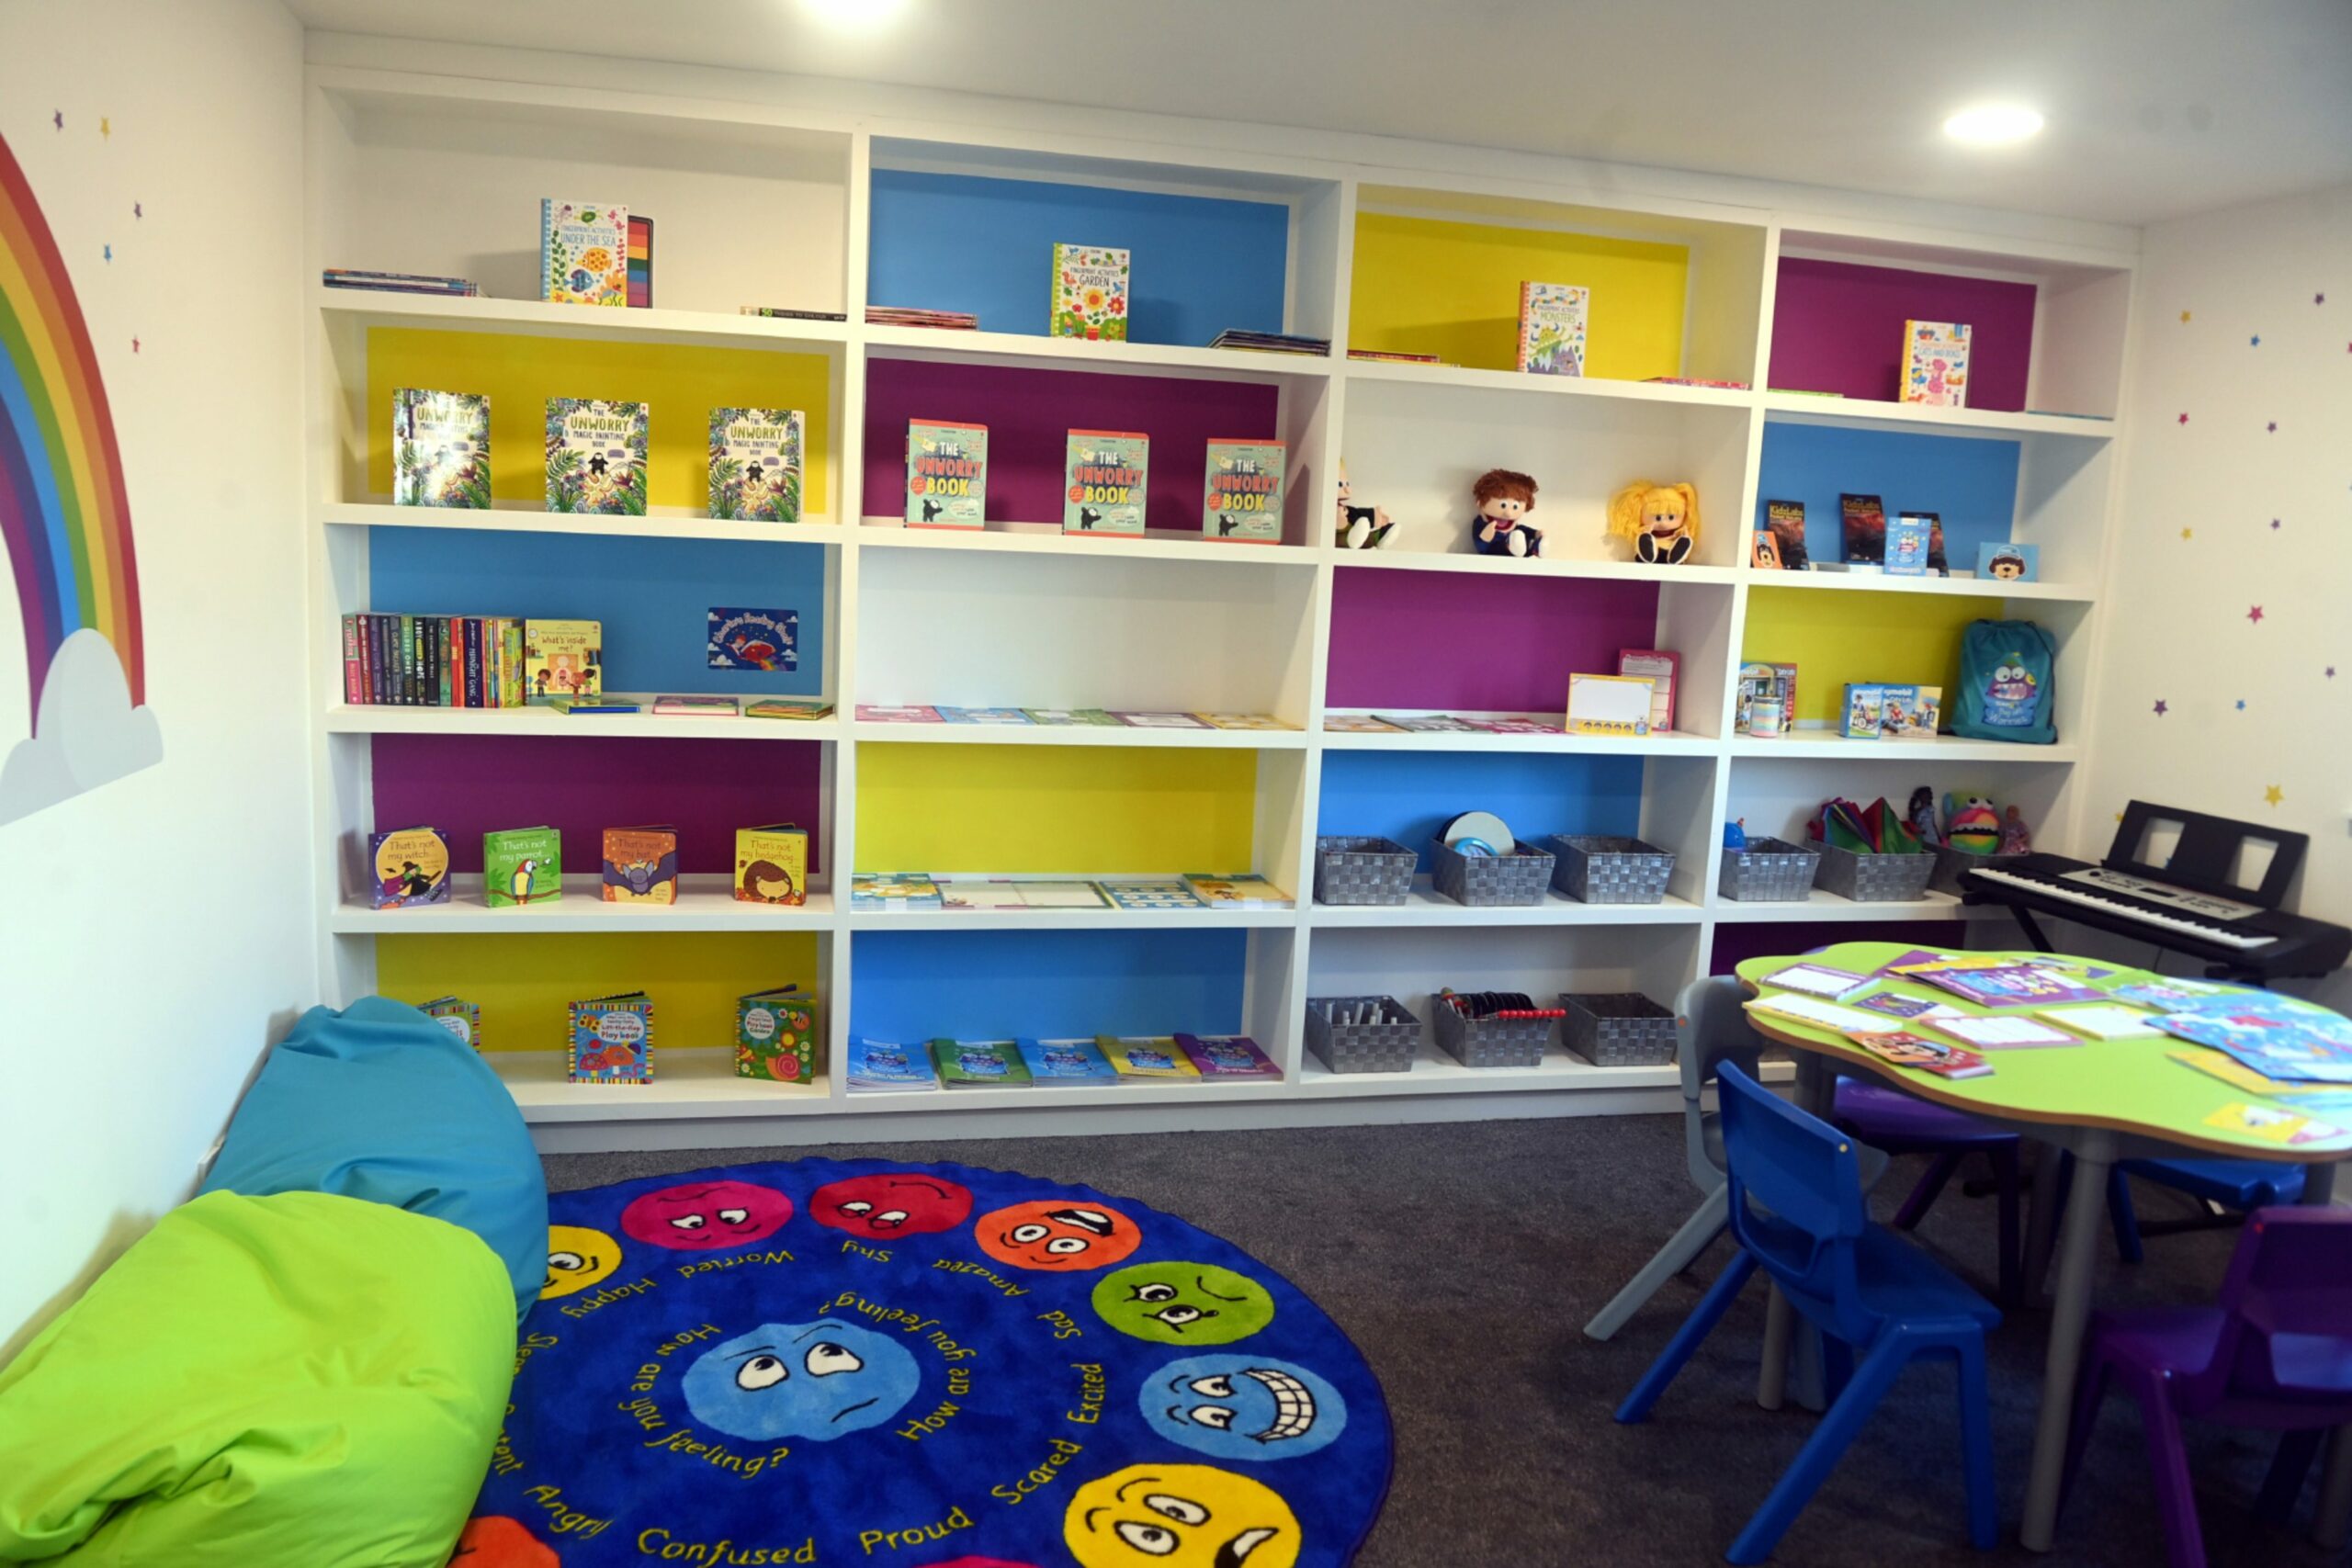 The rooms have been kitted out with toys, books and colourful furniture. Image: Chris Sumner/ DC Thomson